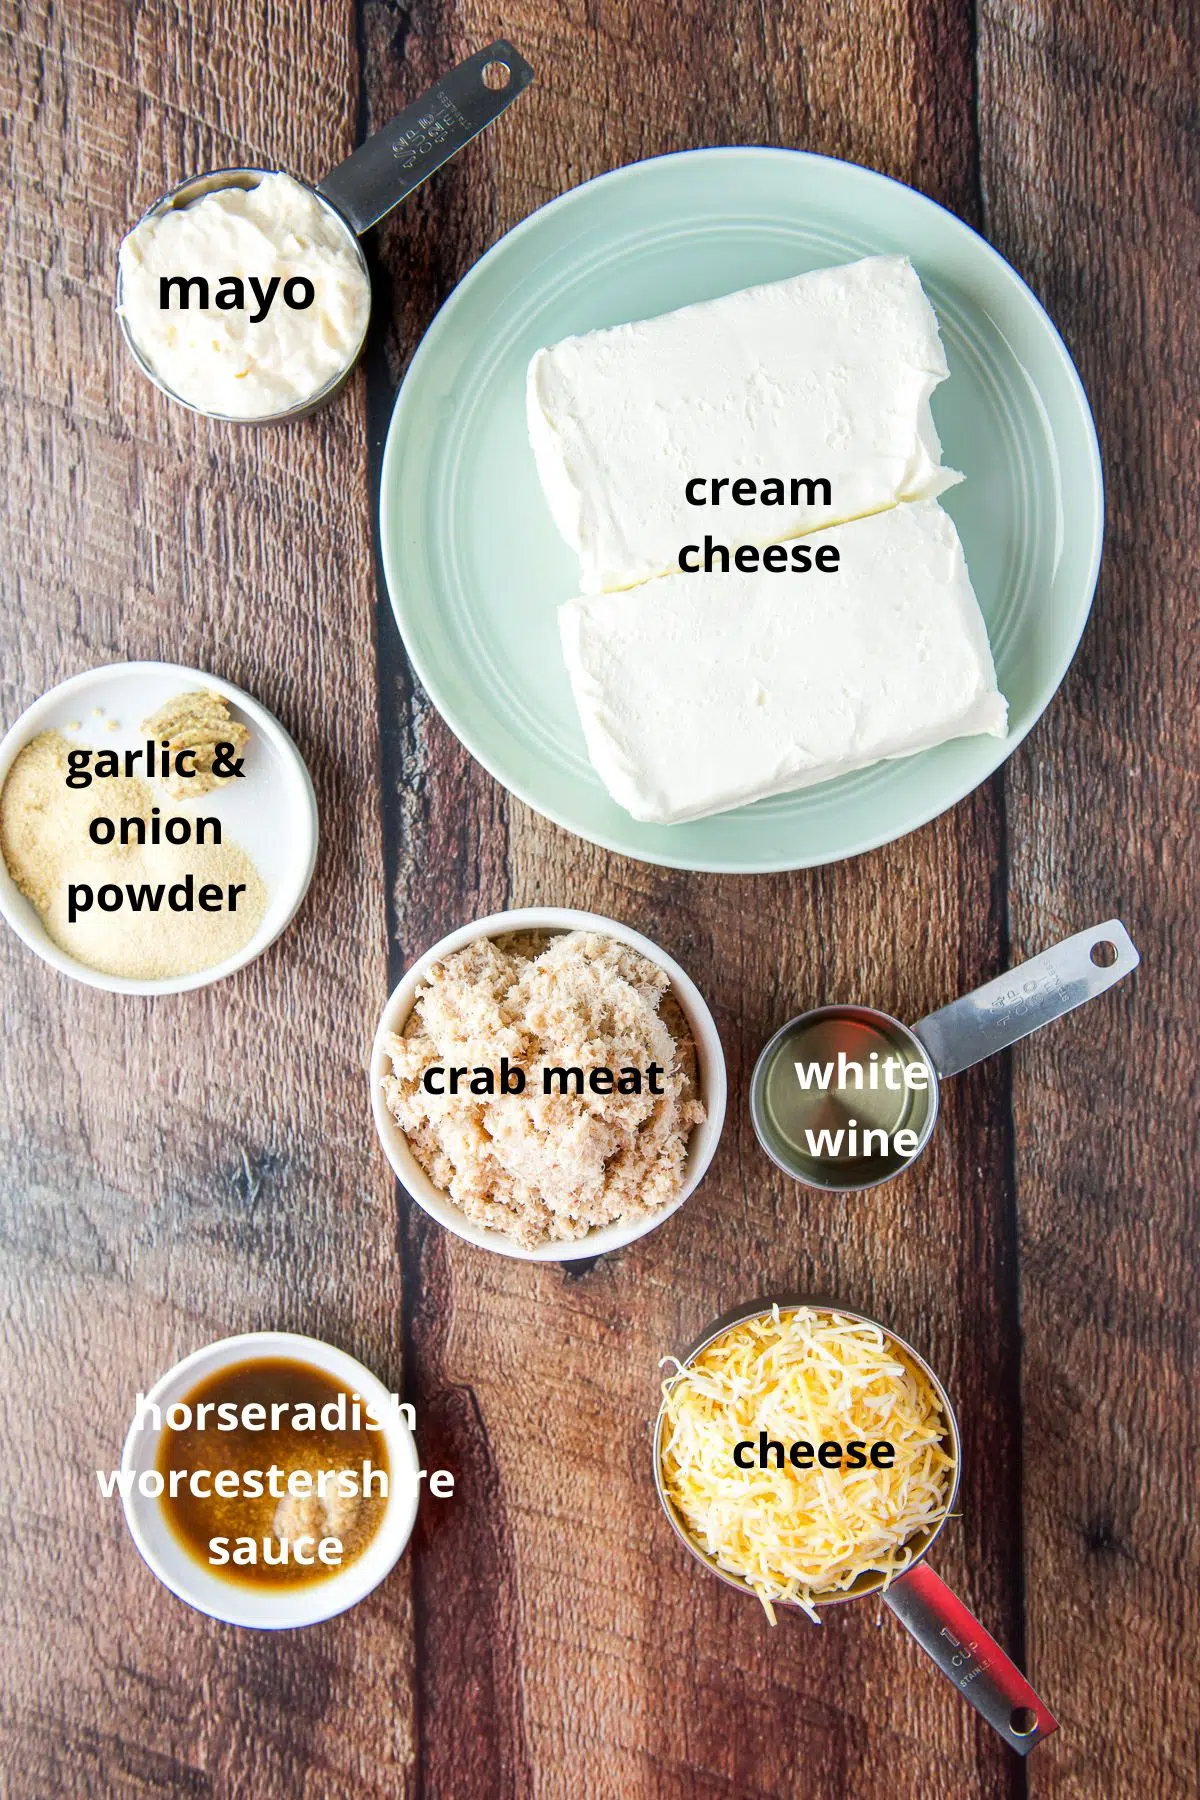 Ingredients for the dip - cream cheese, mayo, spices, crabmeat, wine, horseradish, Worcestershire sauce, and cheese